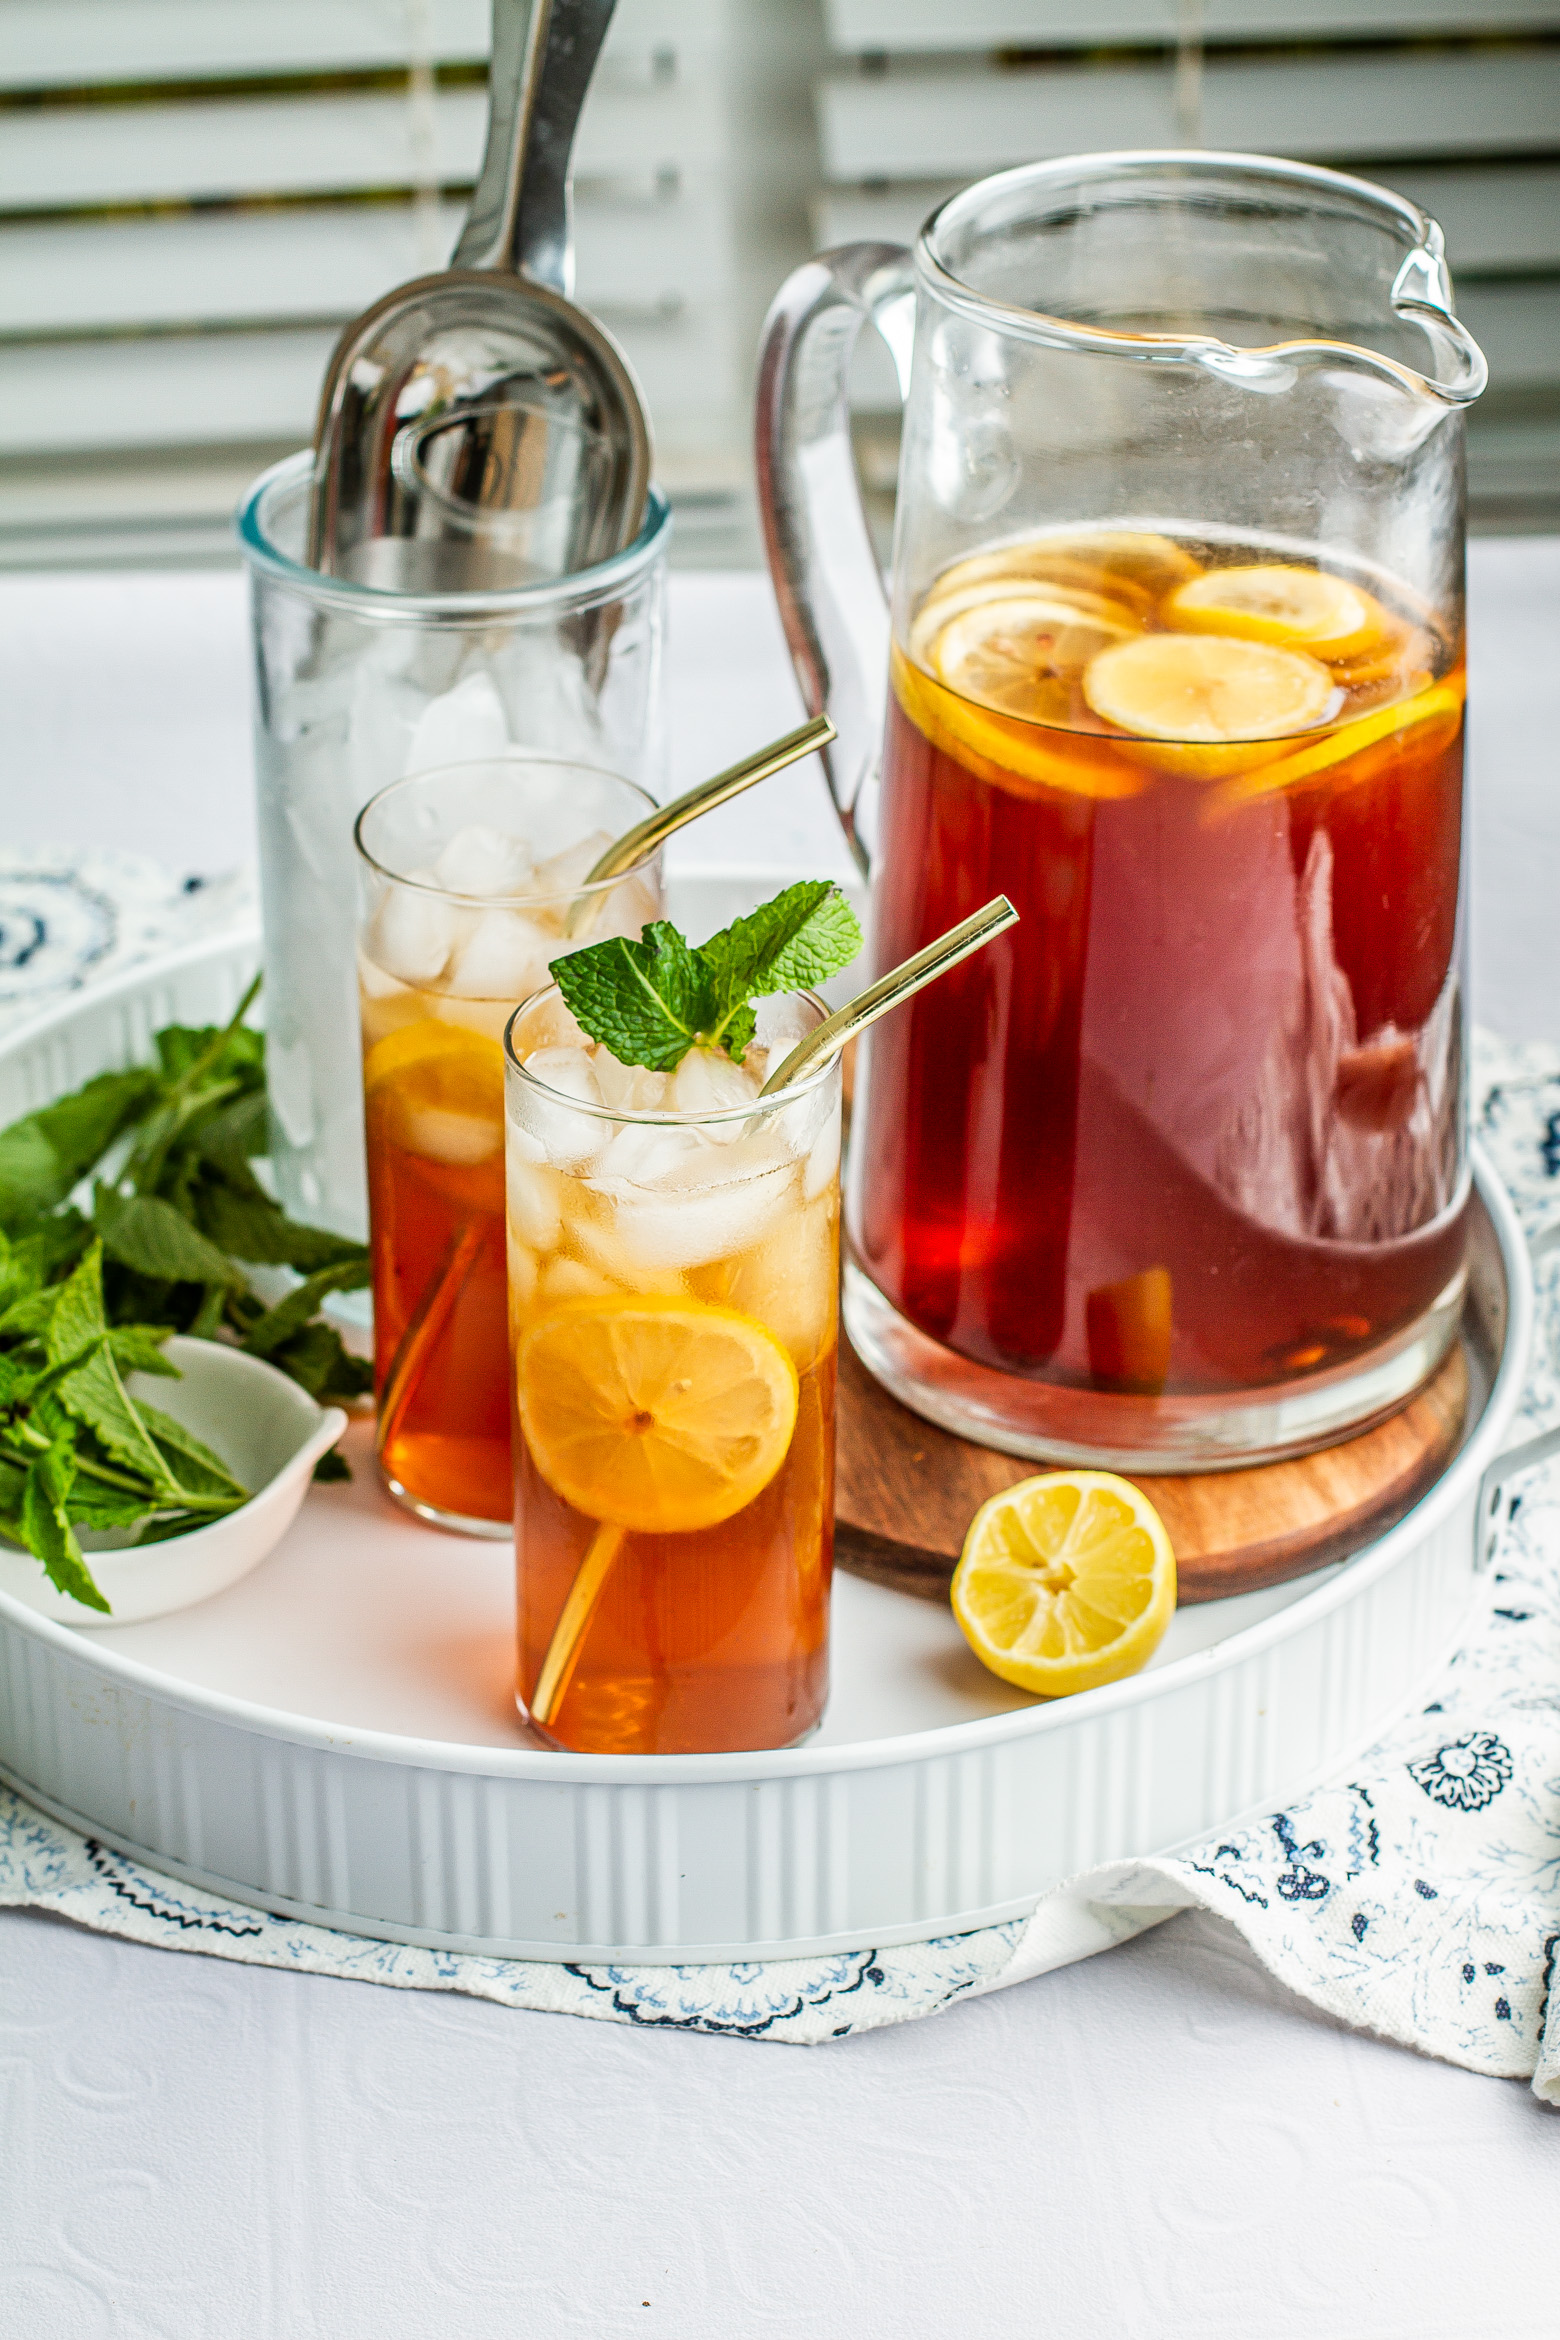 Southern sweet tea in a pitcher and two glasses on a serving tray garnish with mint and lemon